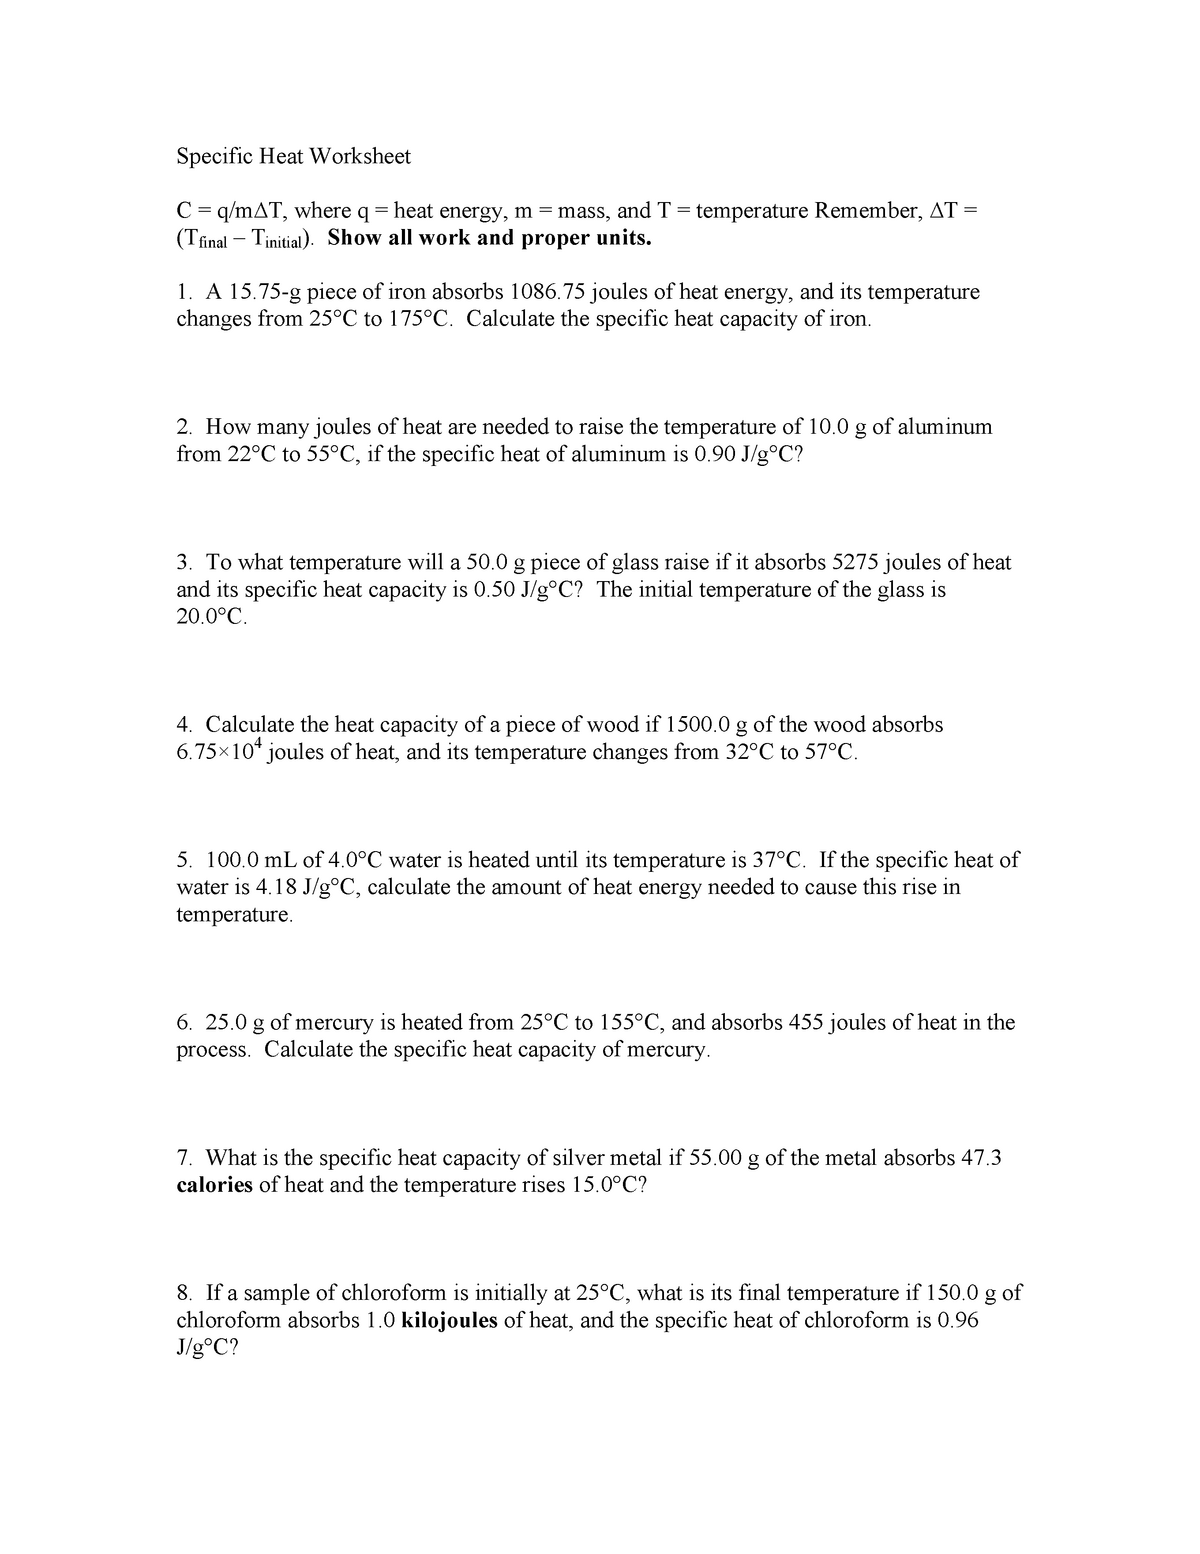 Specific-Heat-Practice-Problems - Specific Heat Worksheet C = T/m Intended For Specific Heat Worksheet Answers